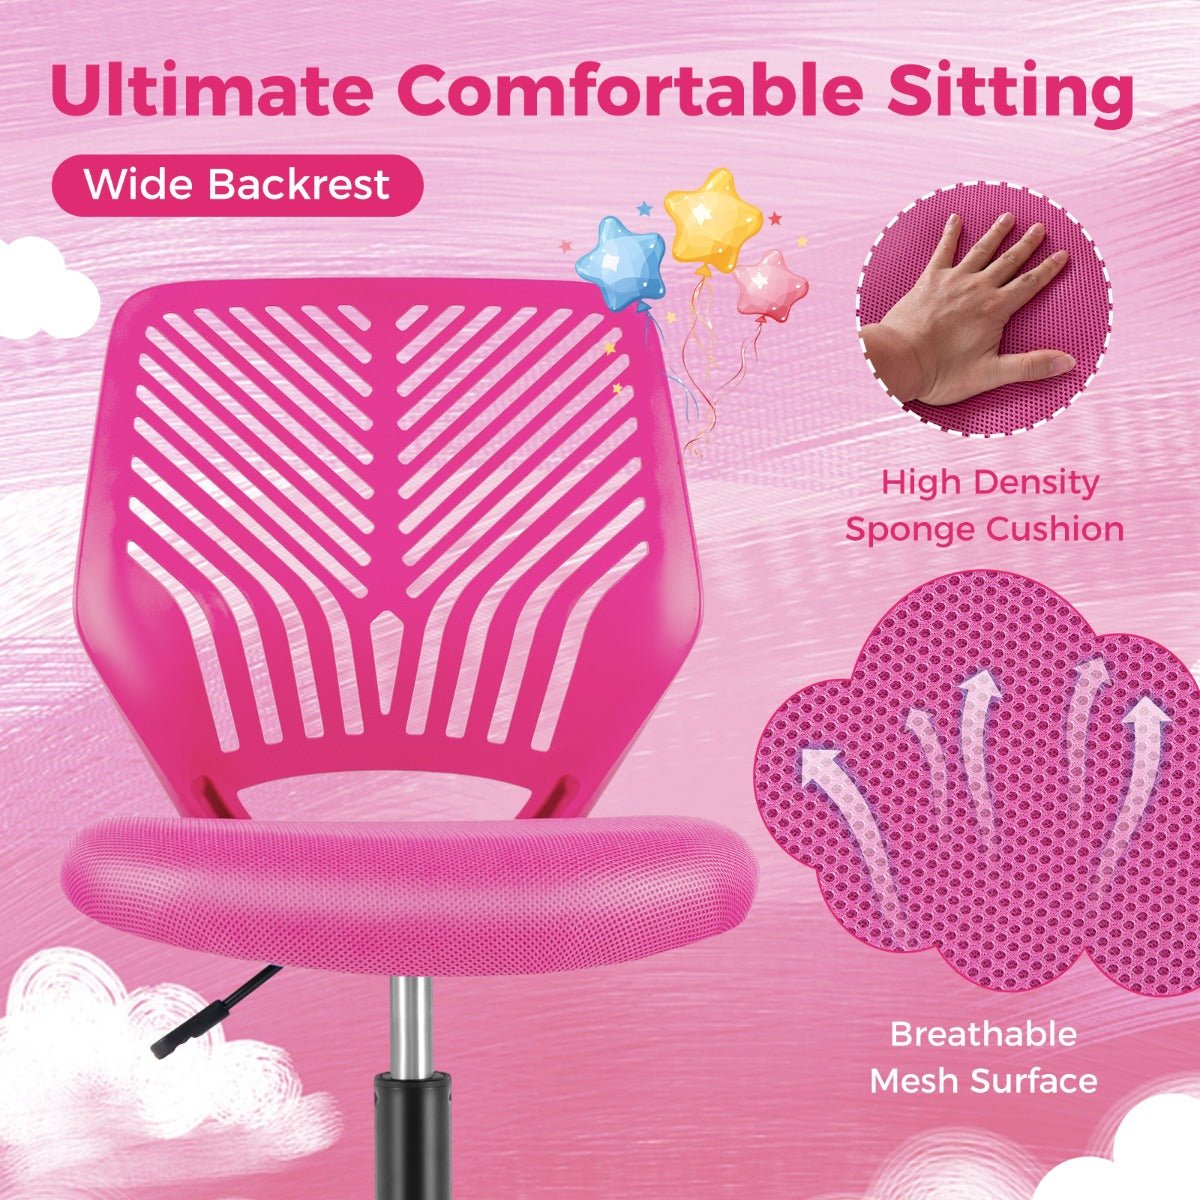 Junior Mesh Office Chair with Wheels in Pink - Kids Mega Mart